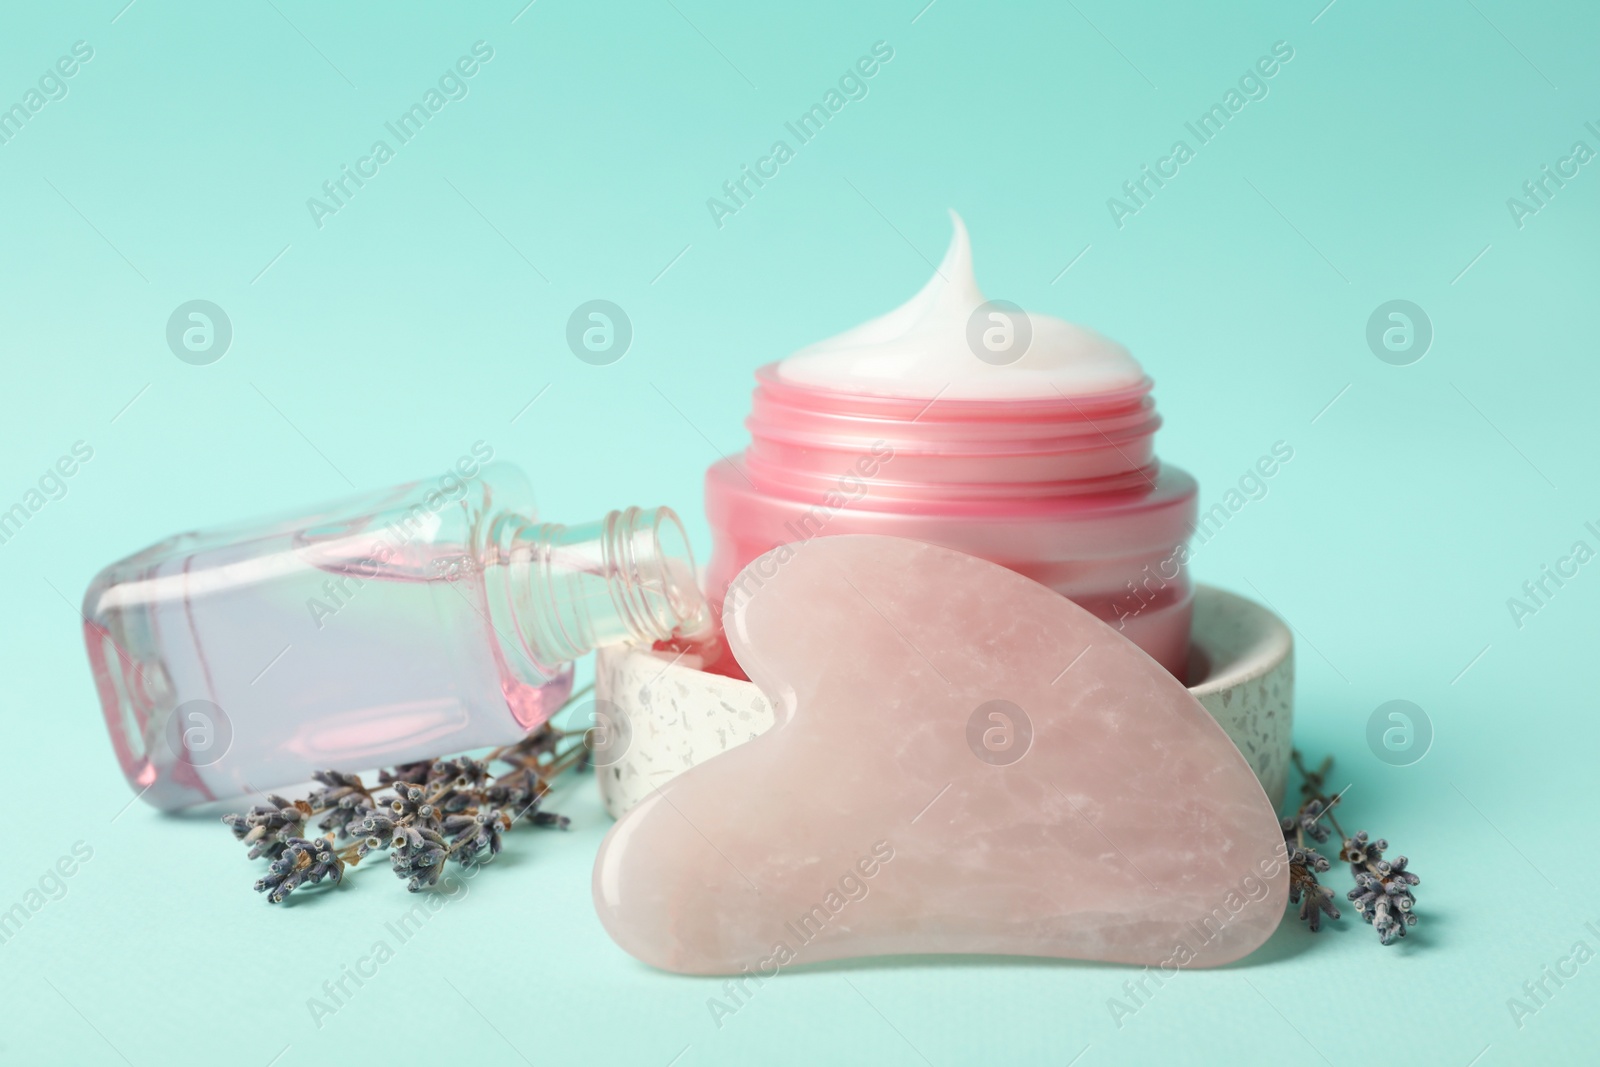 Photo of Rose quartz gua sha tool, cosmetic products and dried lavender flowers on light blue background